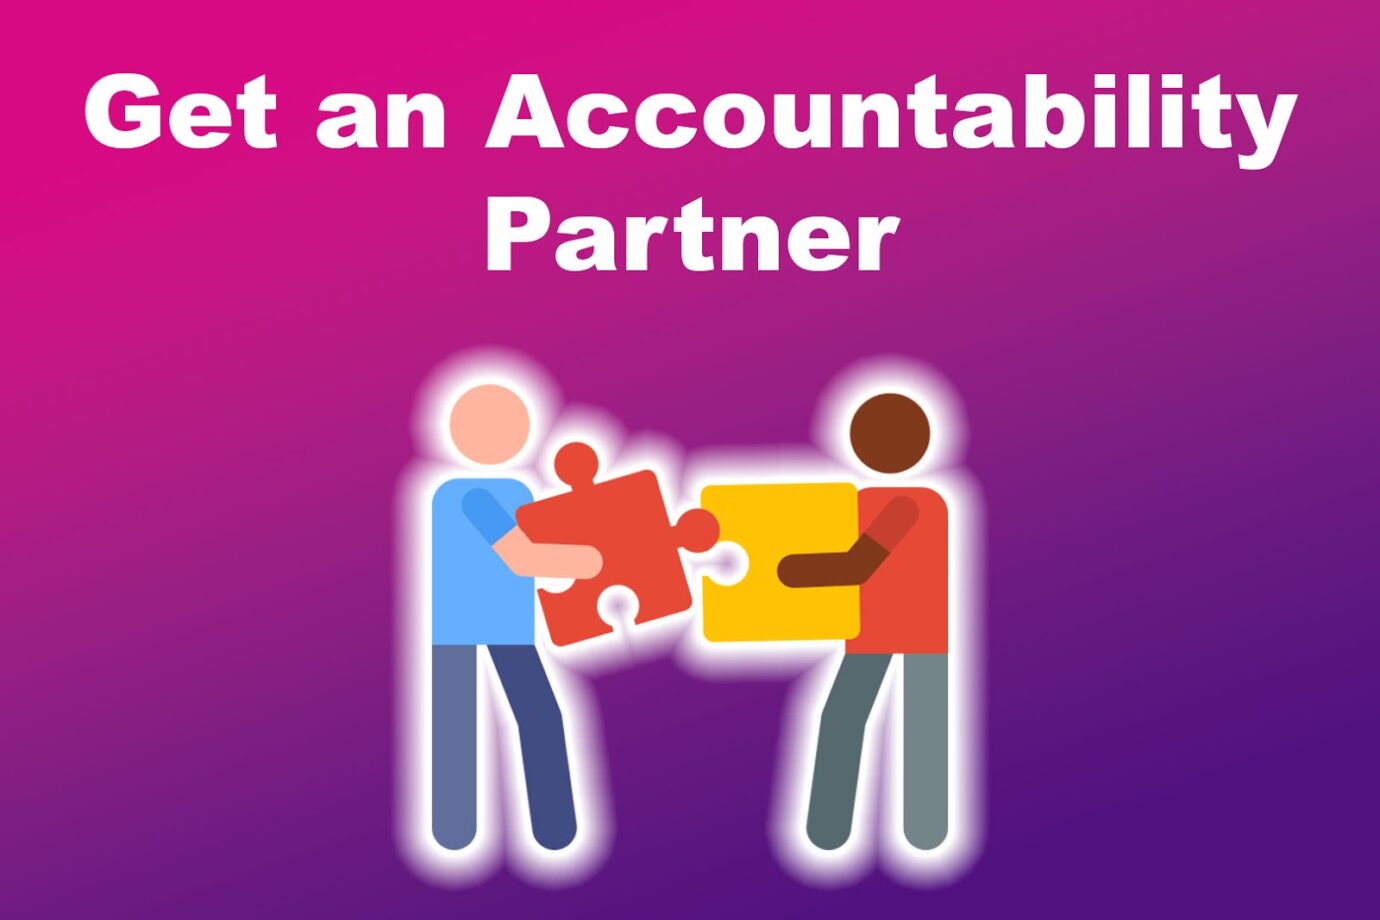 Get an Accountability Partner to Increase Productivity